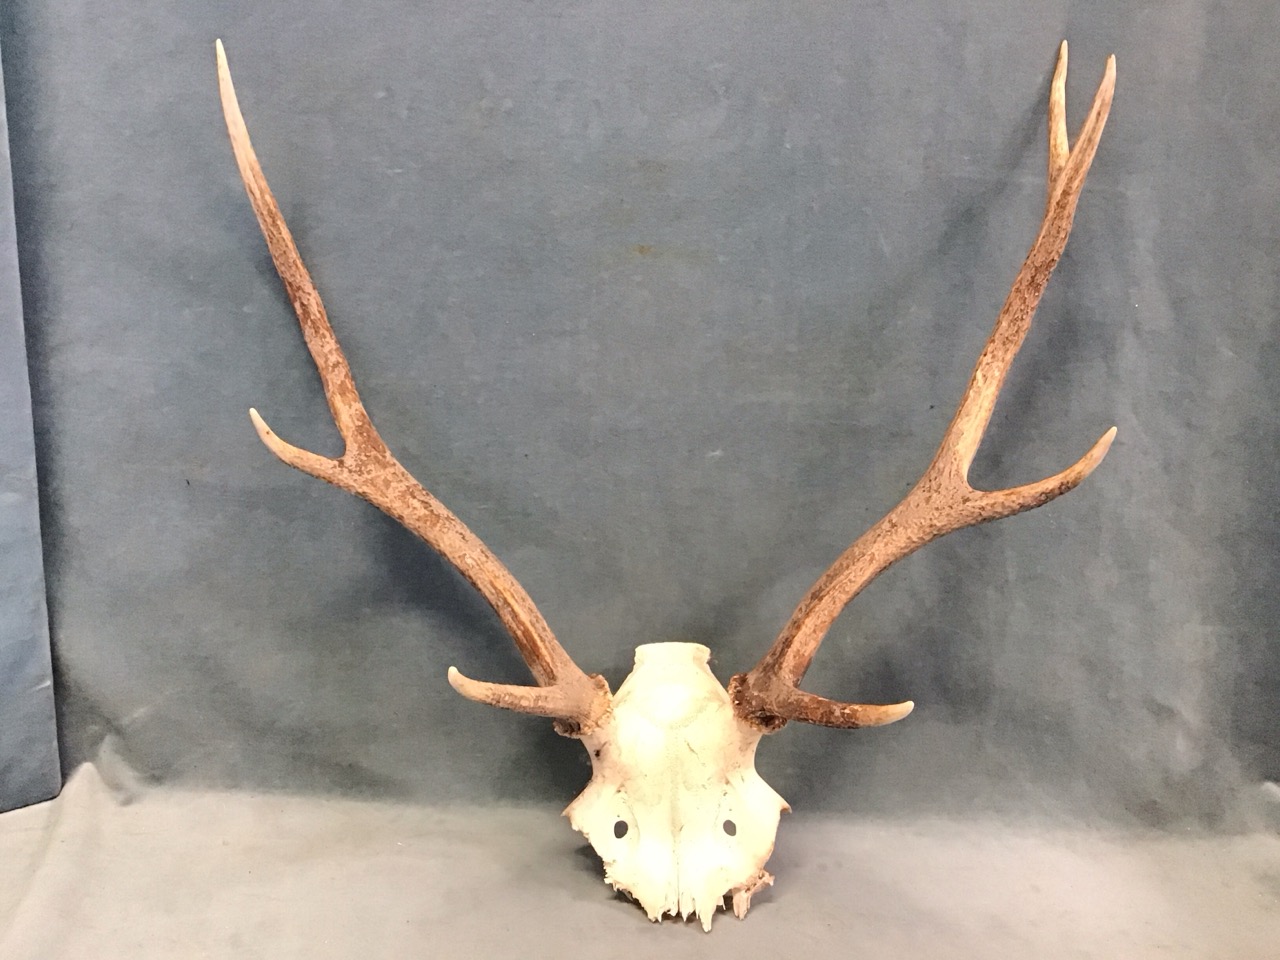 A set of 8-point stag antlers with pierced skull. (20in x 23in)